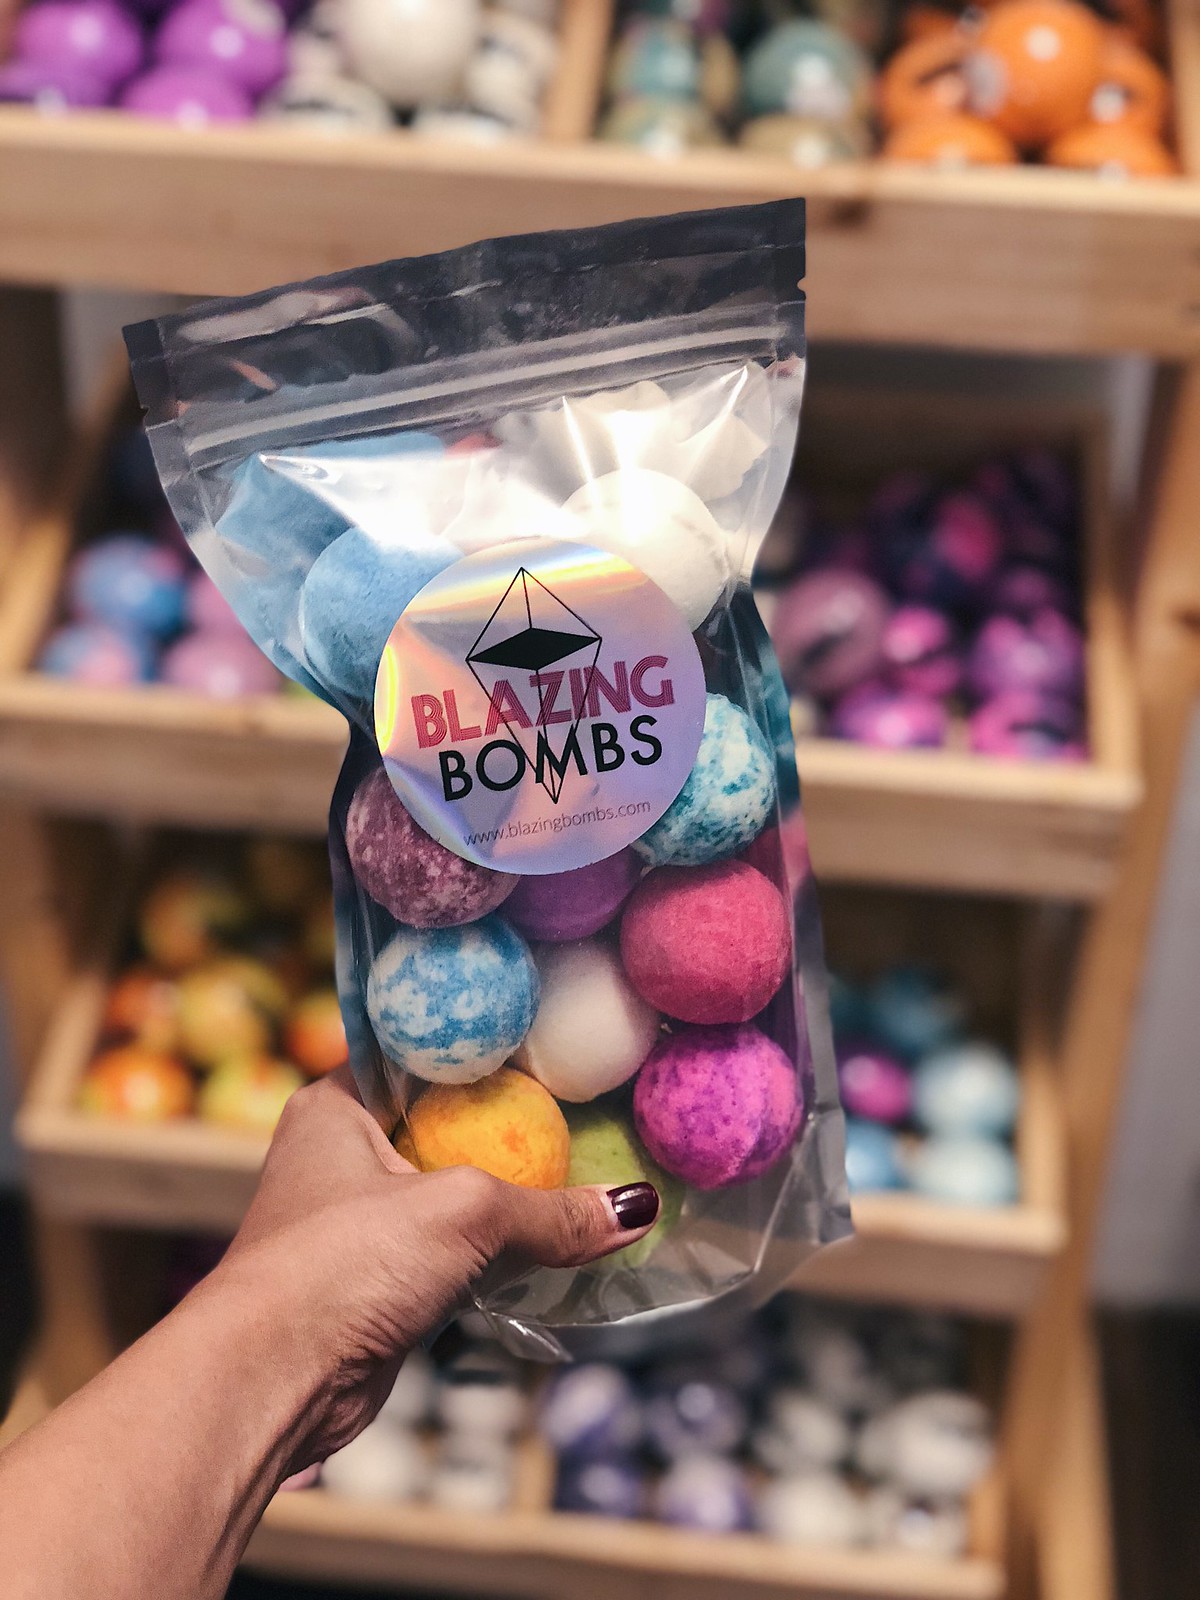 Bath bombs from The Nooks